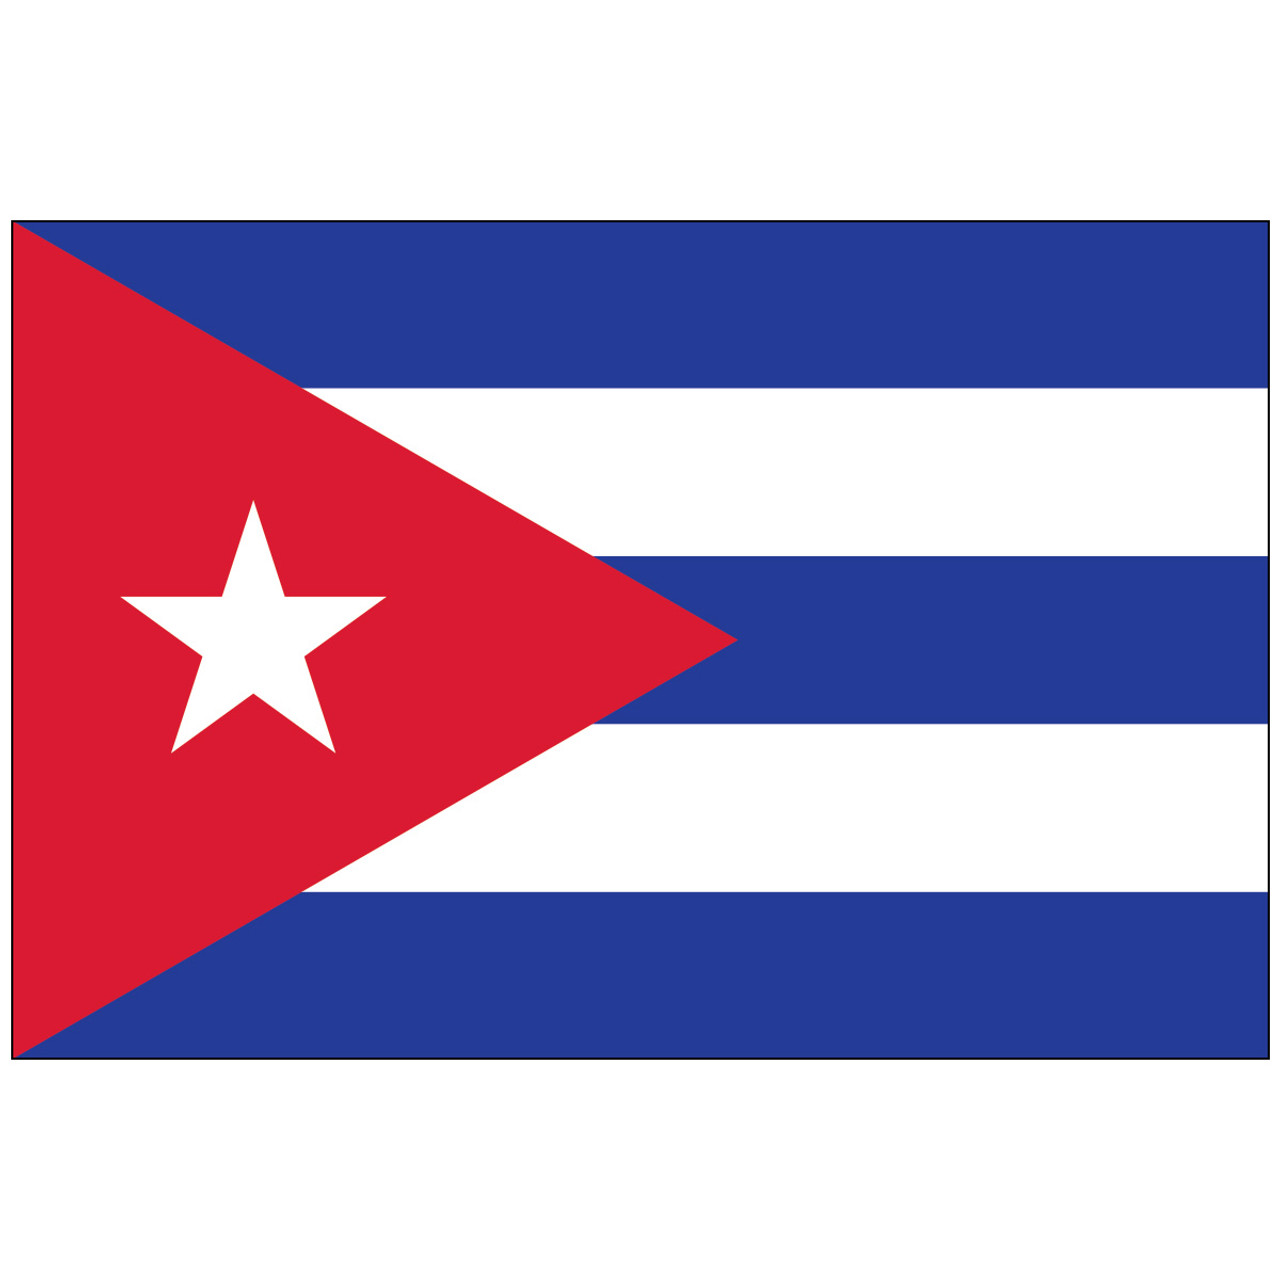 Cuba Download Free HD Maps, Regions and Roads (Images & PDFs)